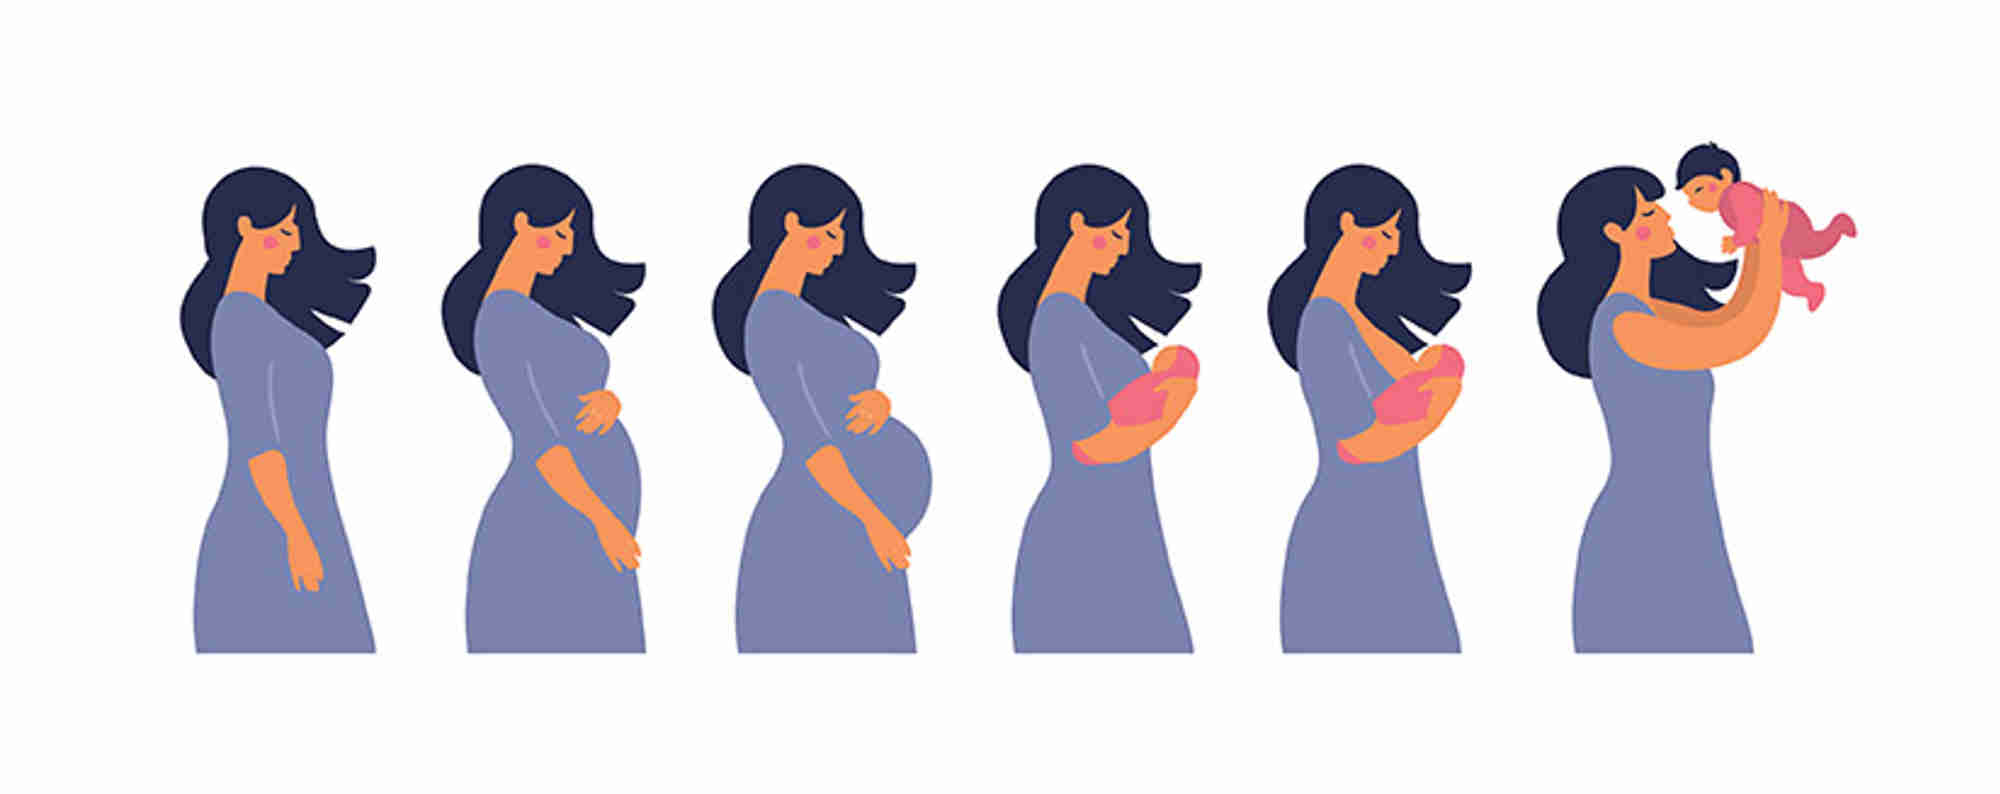 Cartoon of a women at developing stages of pregnancy and post-natally holding an infant